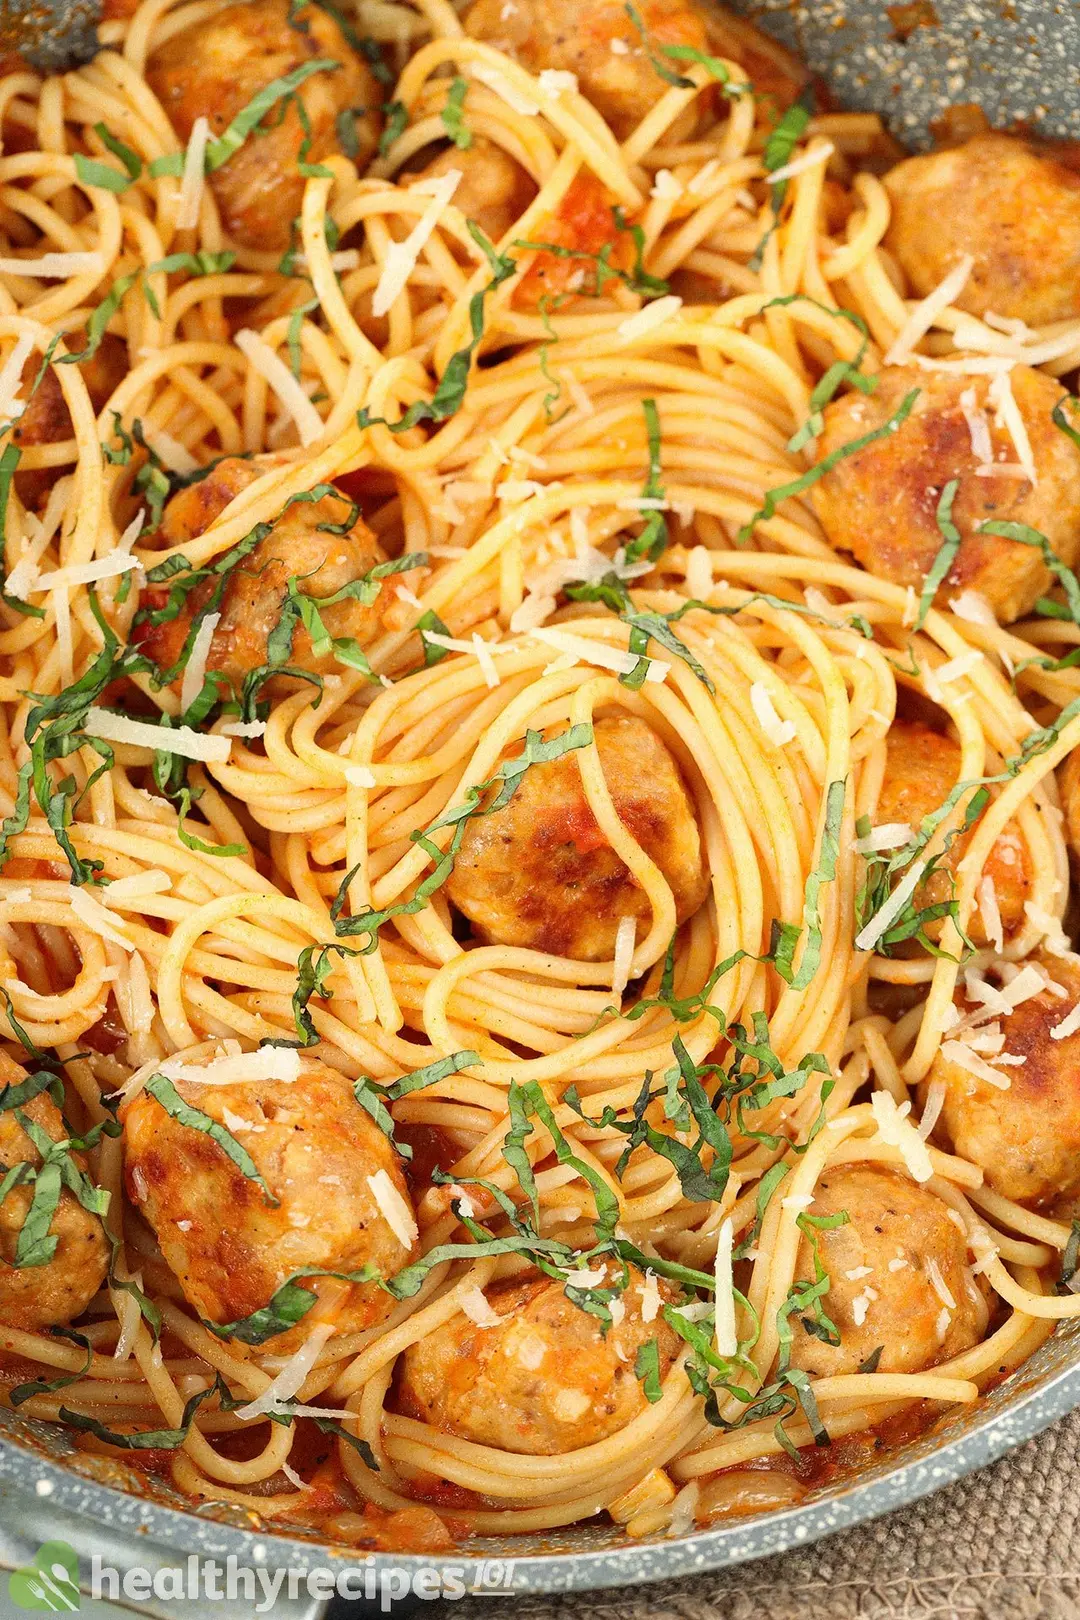 A close-up shot of chicken meatballs with spaghetti, shredded cheese, and parsley